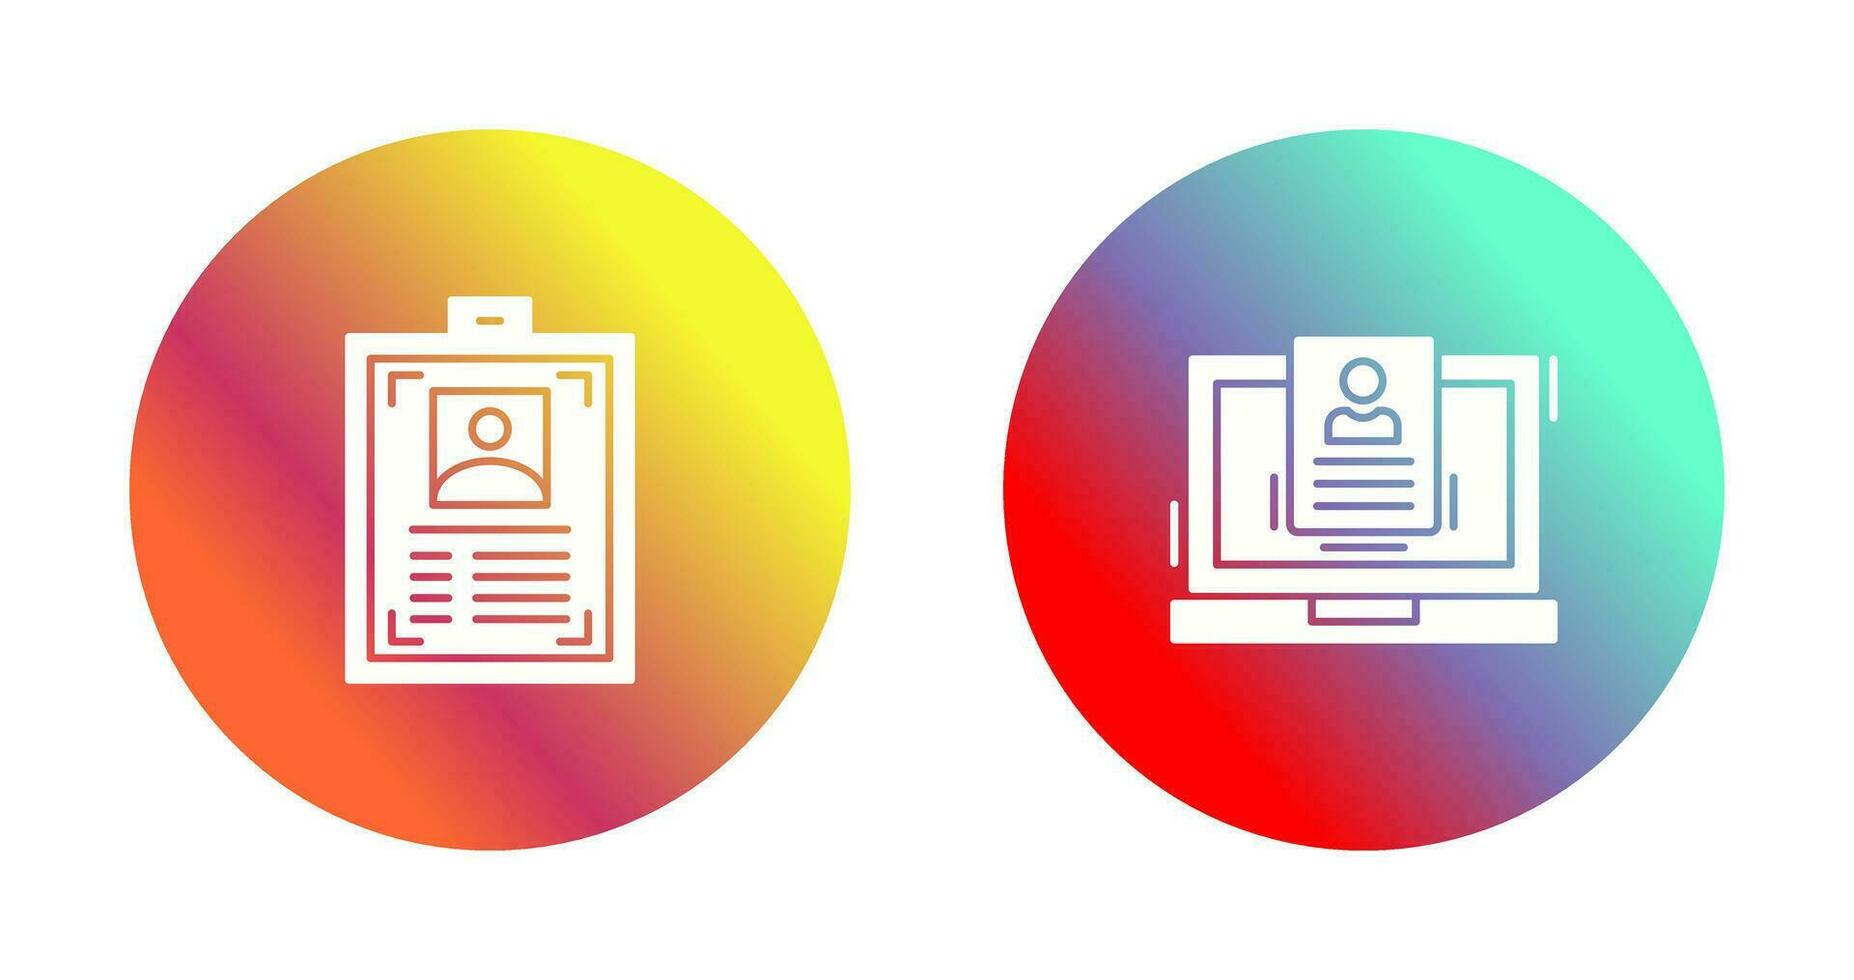 User and ID Card Icon vector